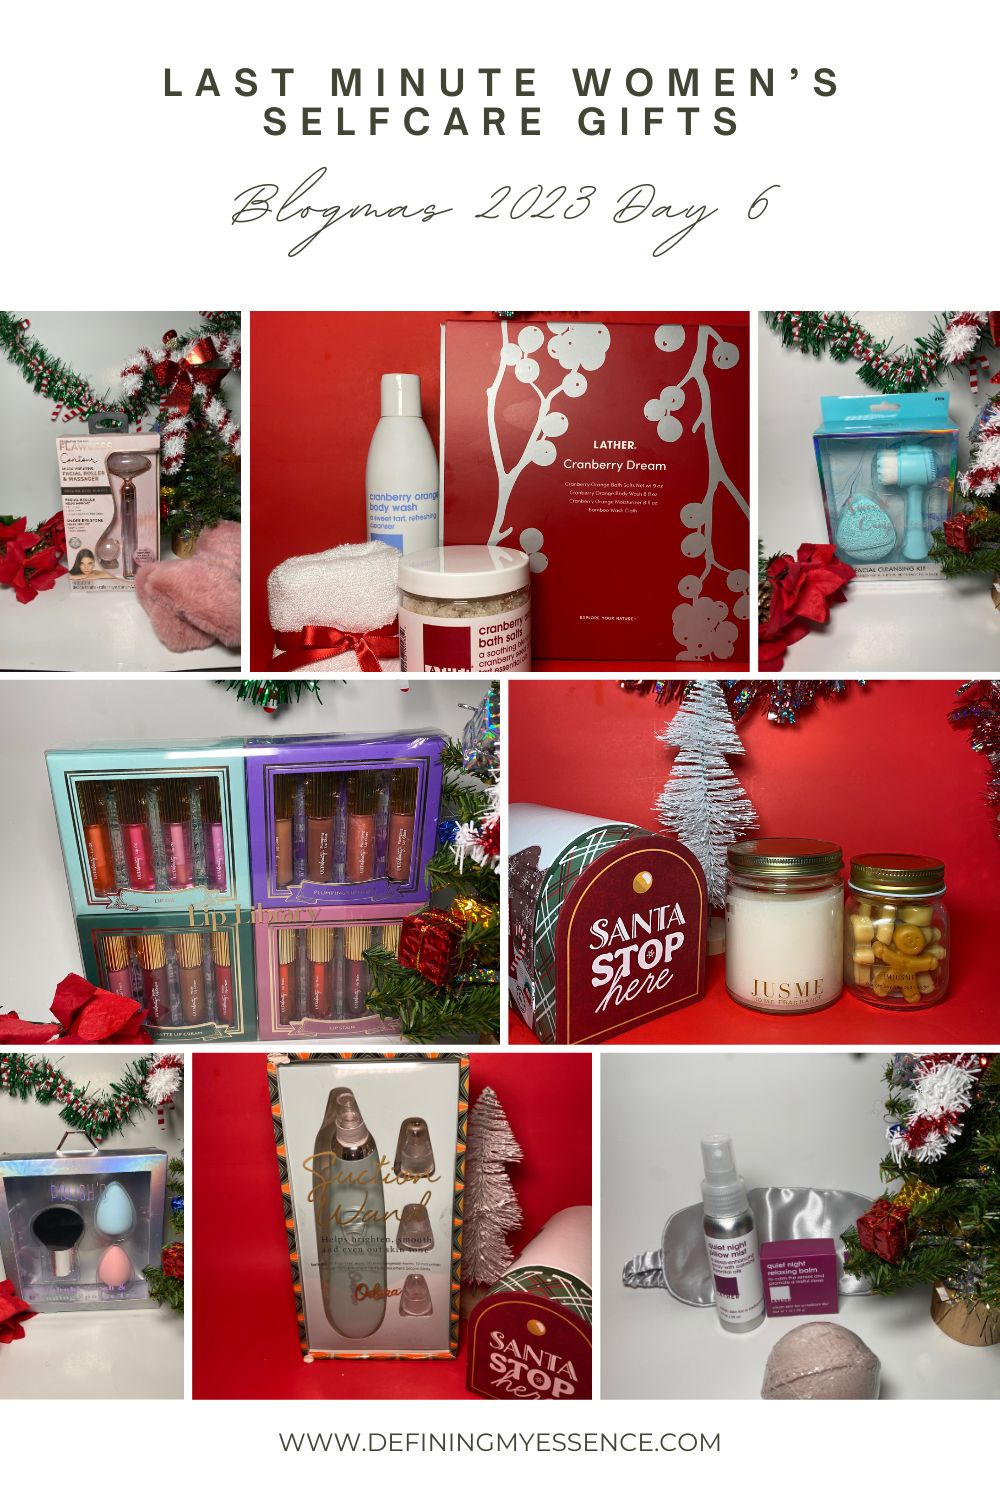 Last Minute Women’s Self Care Gifts: Blogmas Day 6